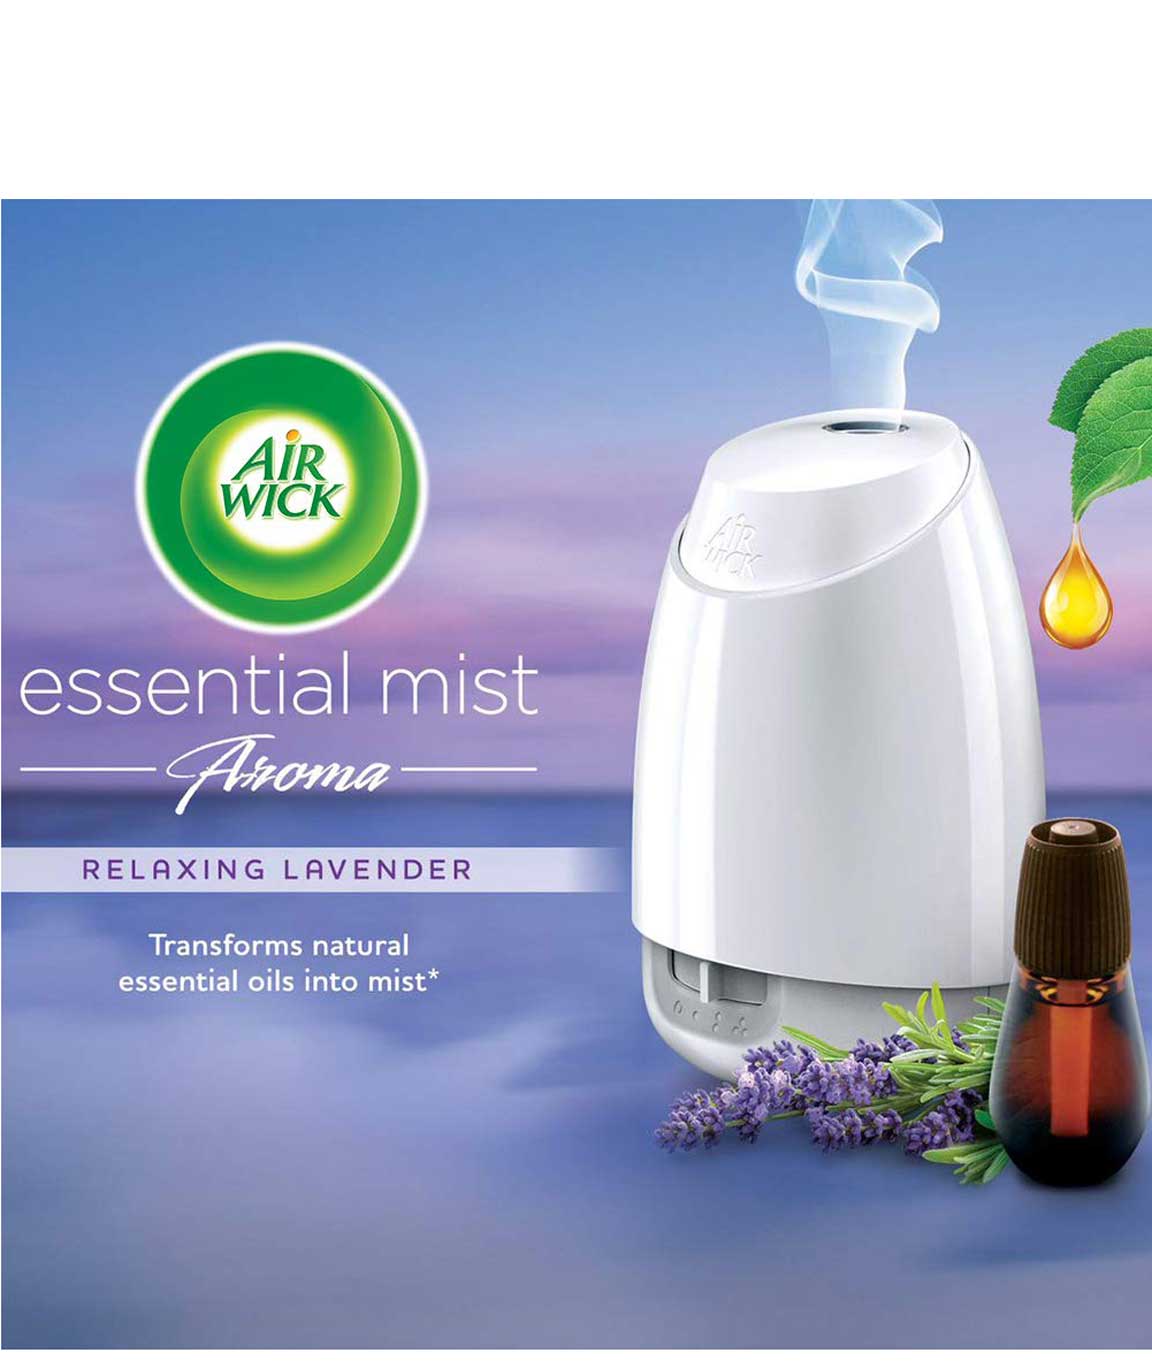 Airwick Essential Mist Diffuser Review